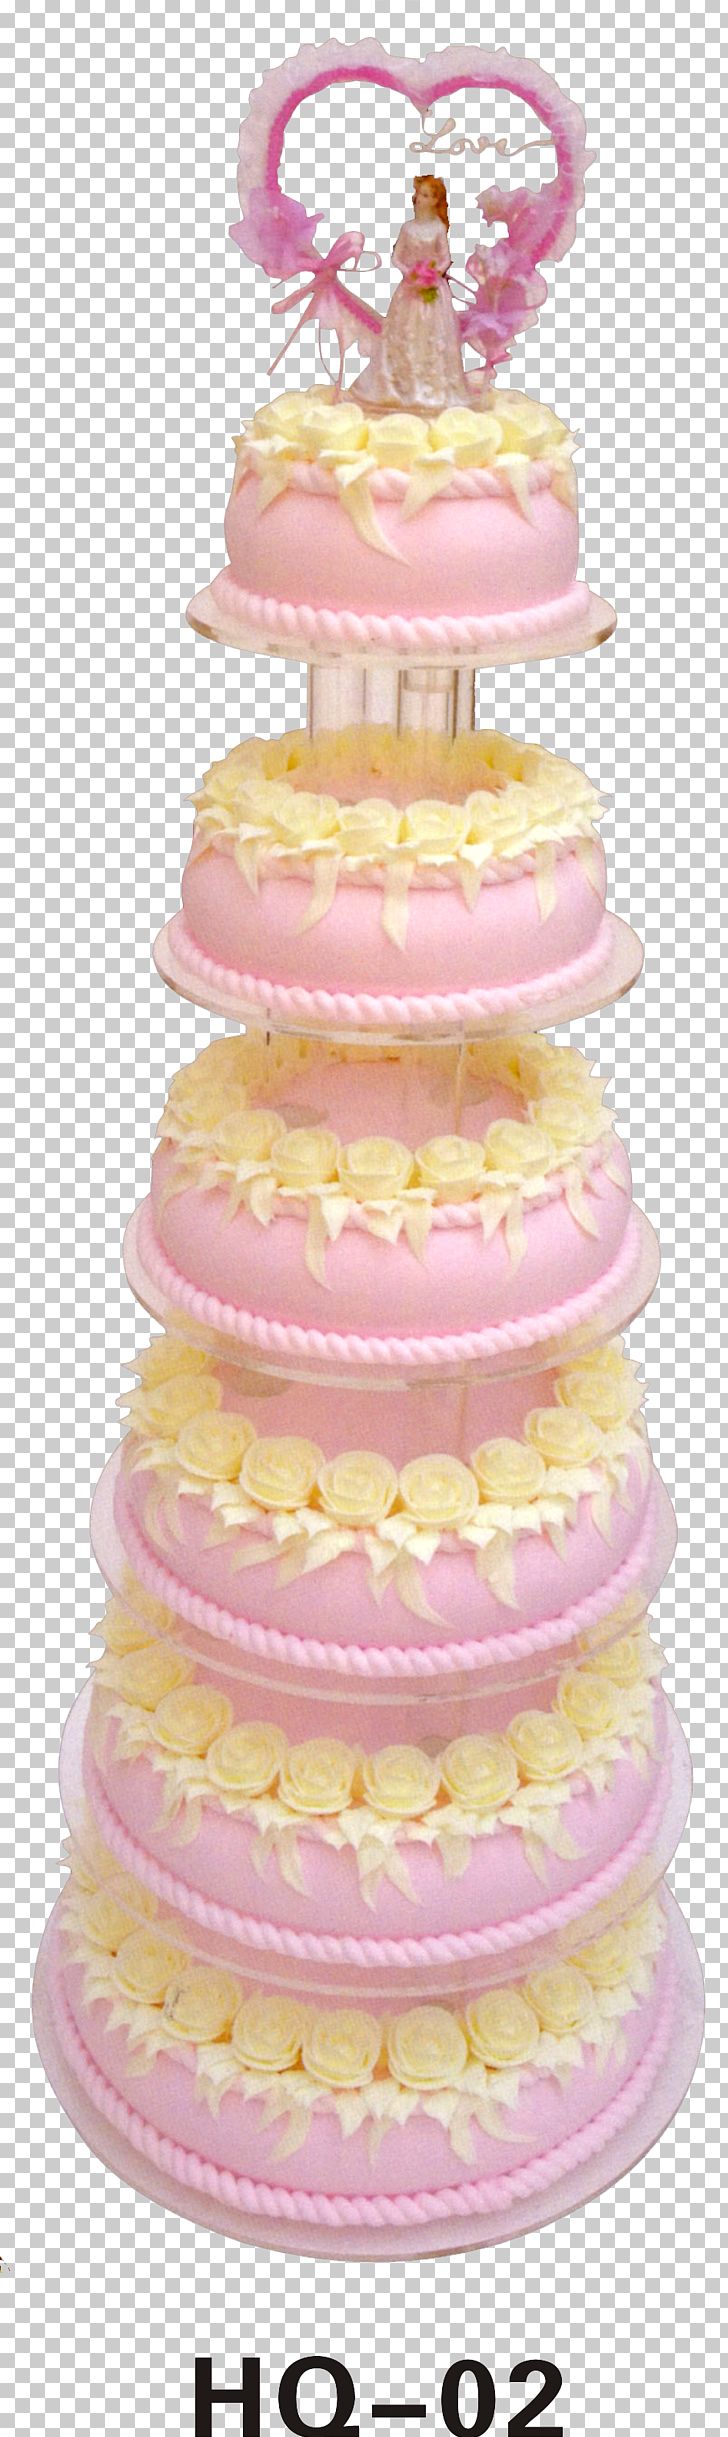 Wedding Cake Torte Layer Cake Pastry PNG, Clipart, Buttercream, Cake, Cake Decorating, Cream, Dessert Free PNG Download